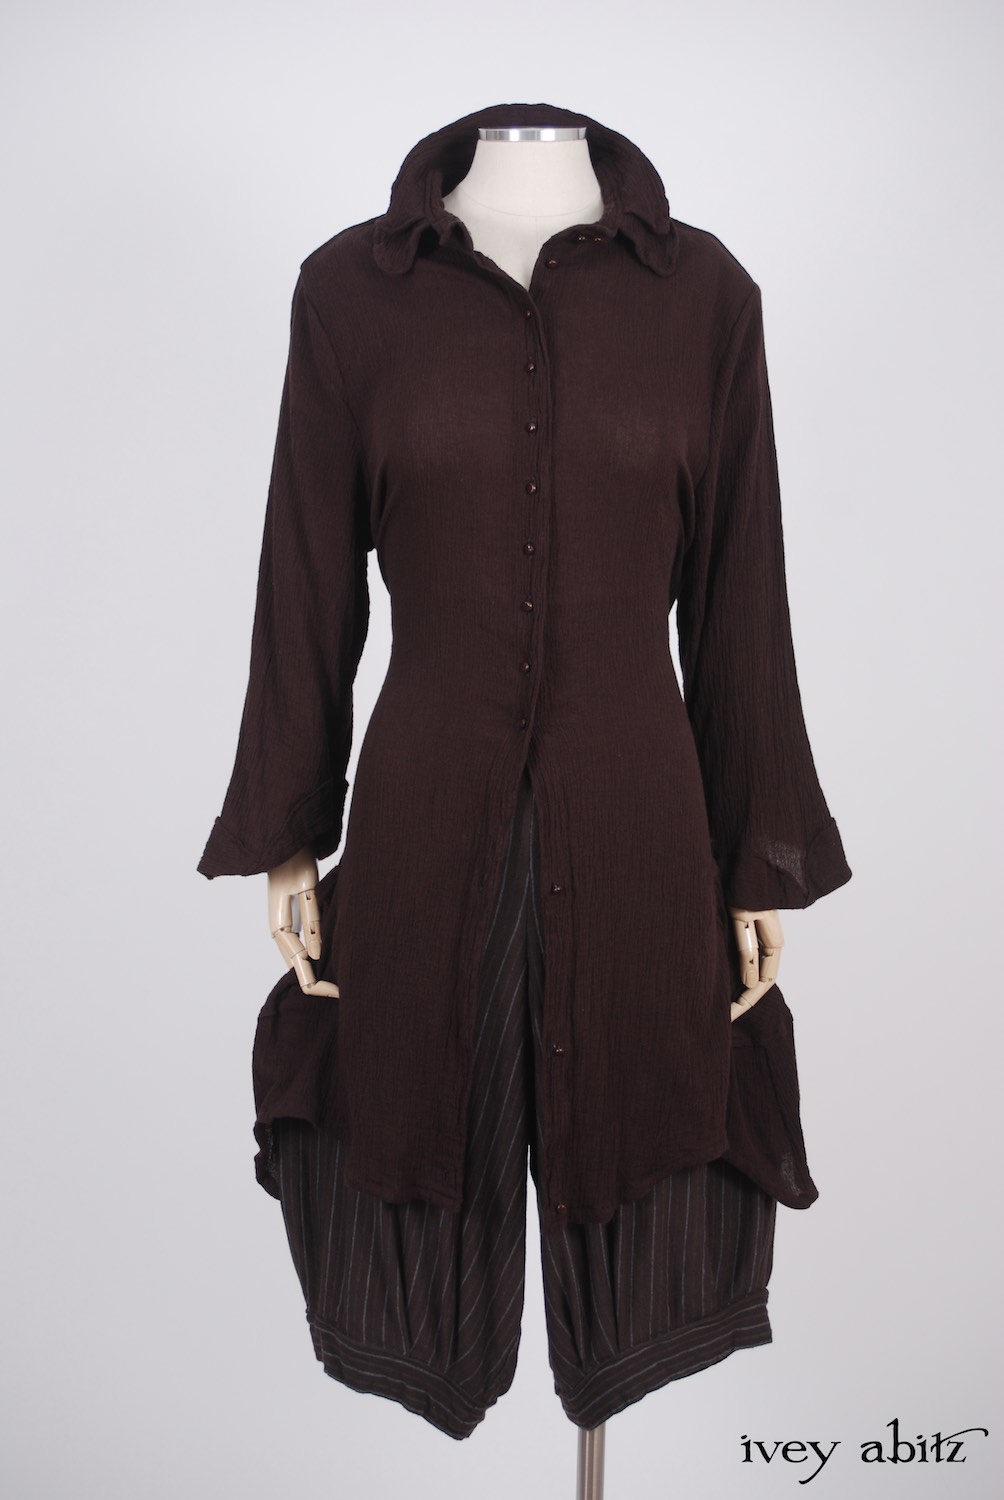 Ivey Abitz - Inglenook Shirt Jacket in Plumseed Crinkled Cotton Gauze  - Coulson Trousers in Plumseed Silky Striped Knit, High Water Length